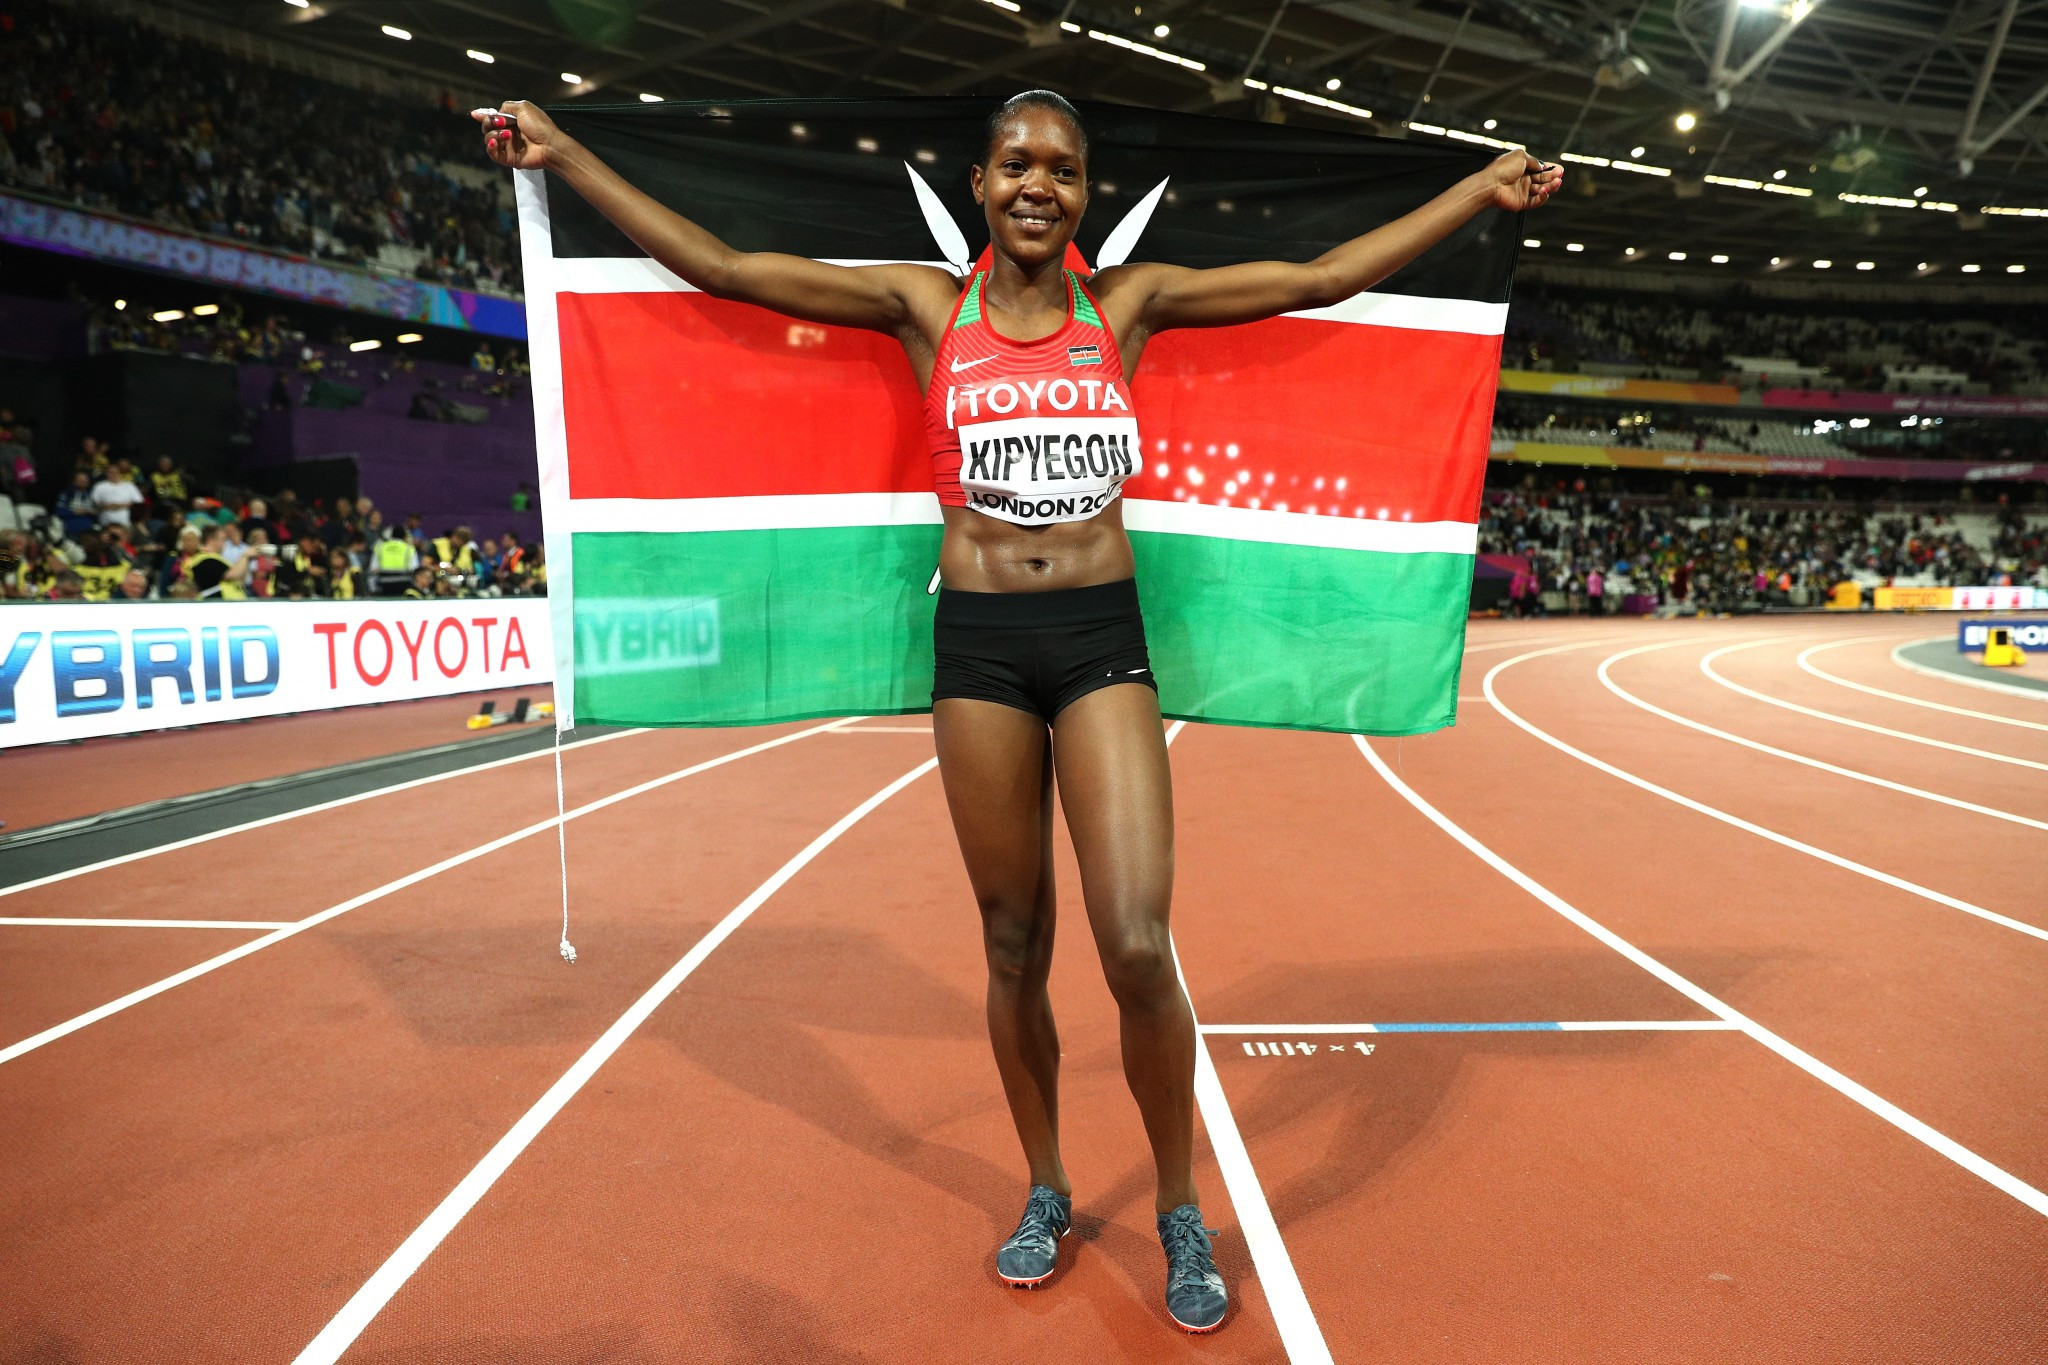 Kenya's Faith Kipyegon held her form to win the 1500m title ©Getty Images